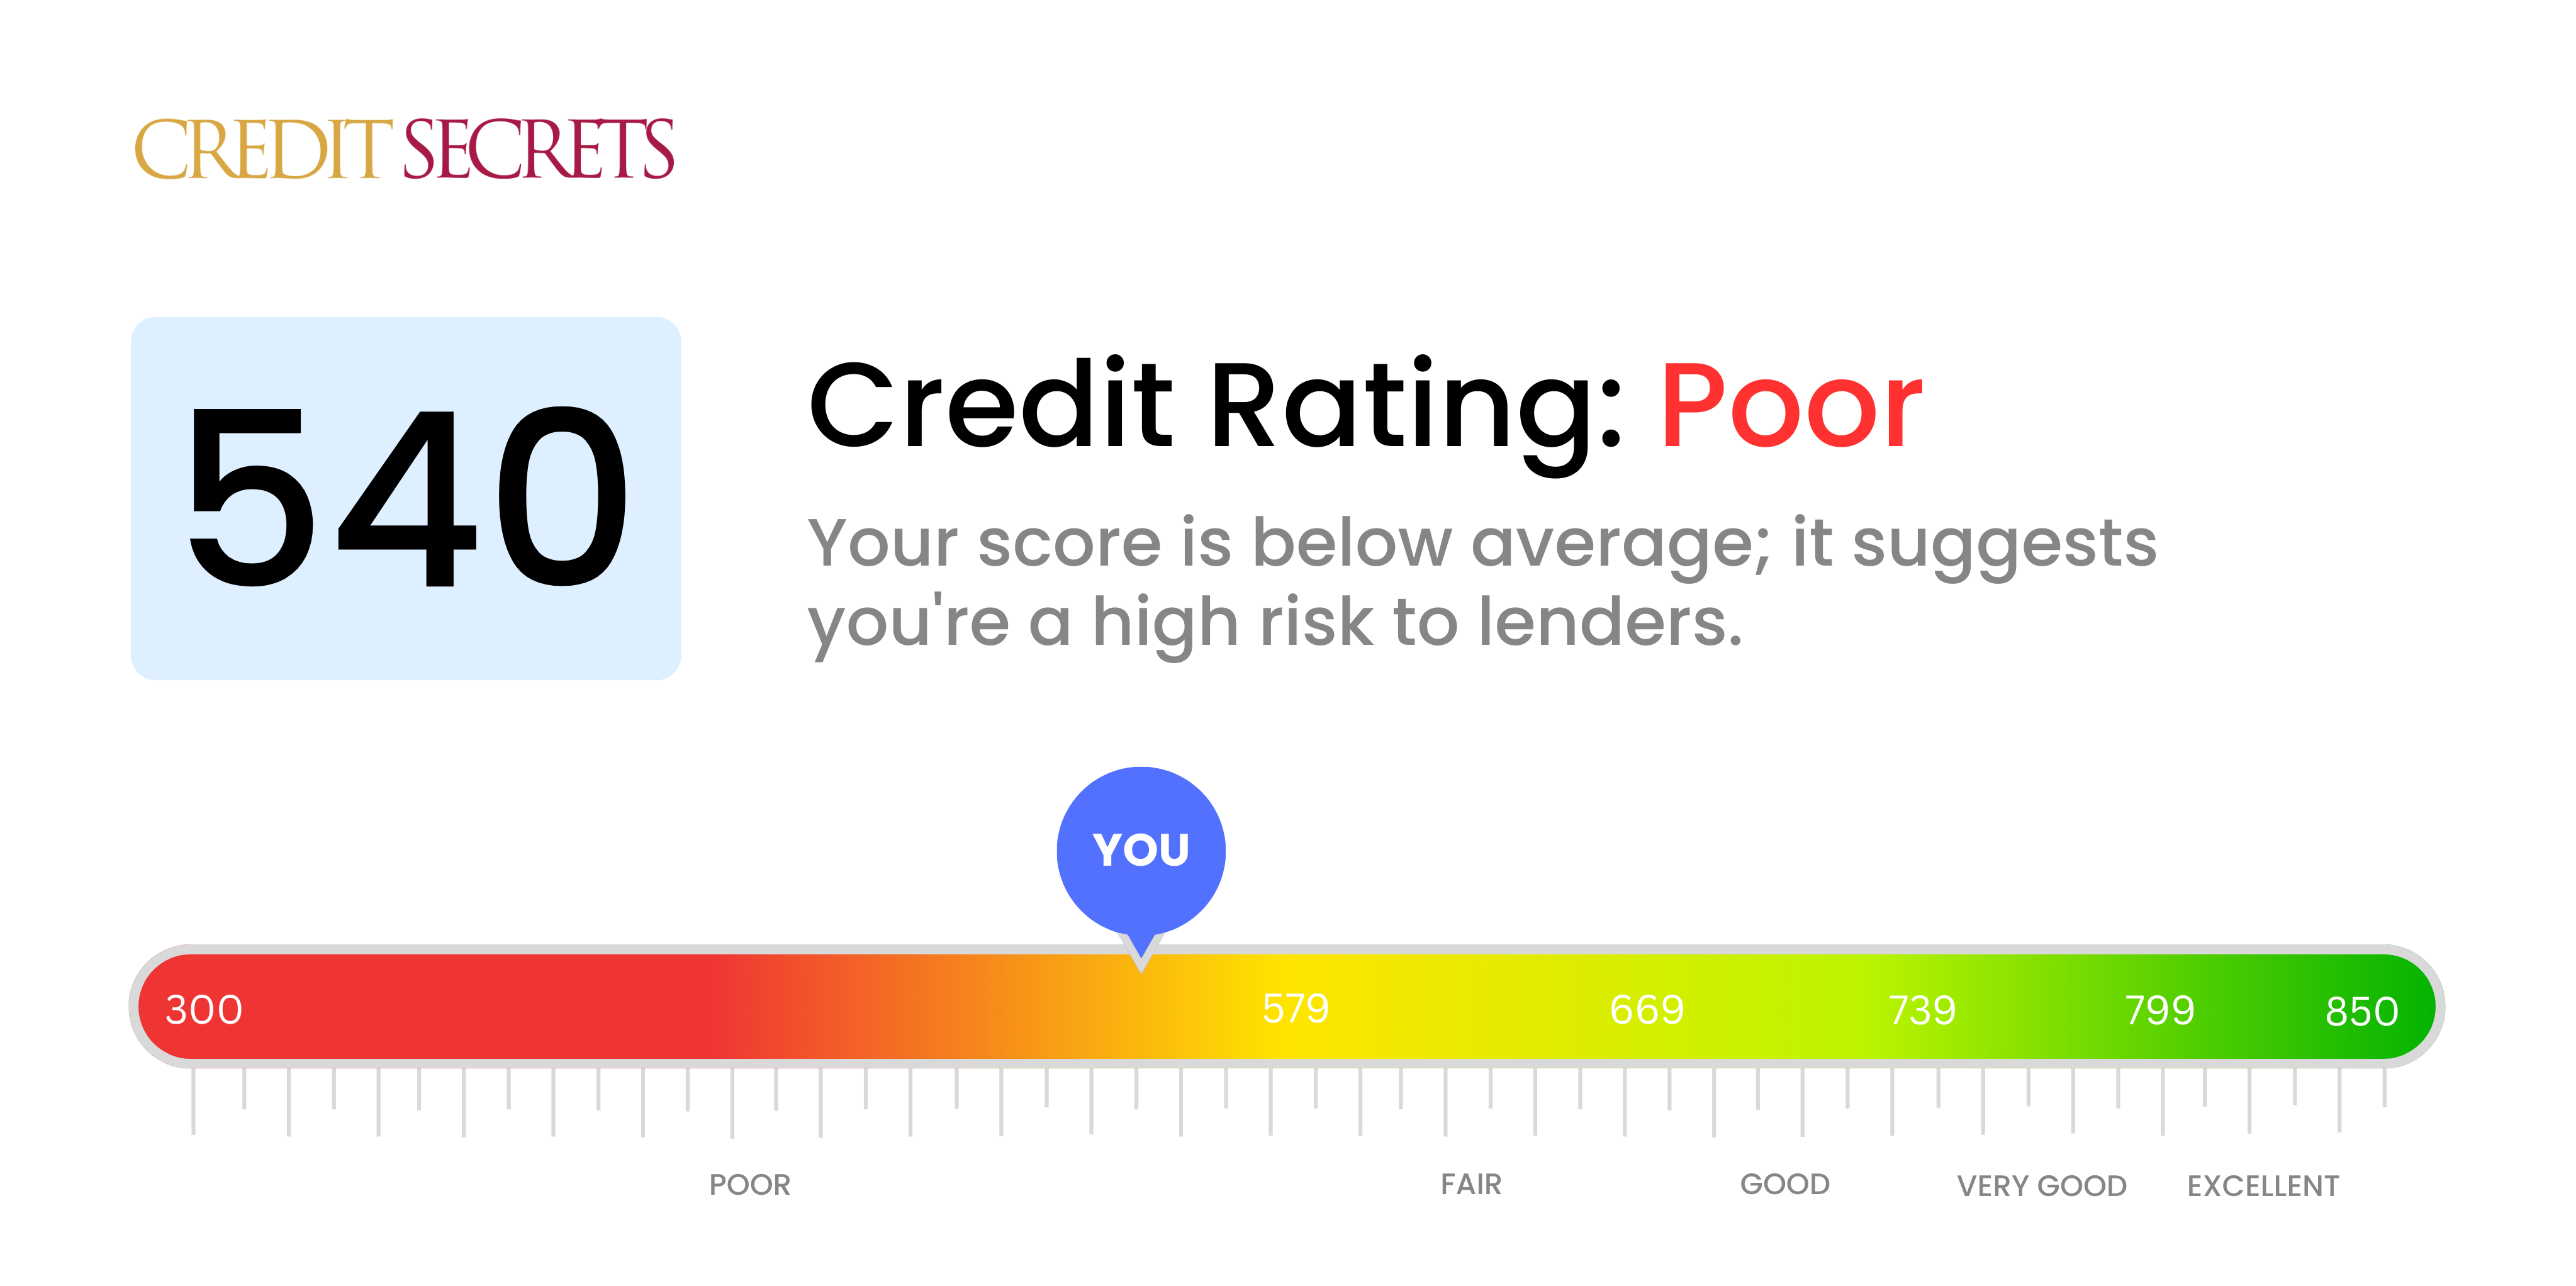 Is 540 a good credit score?